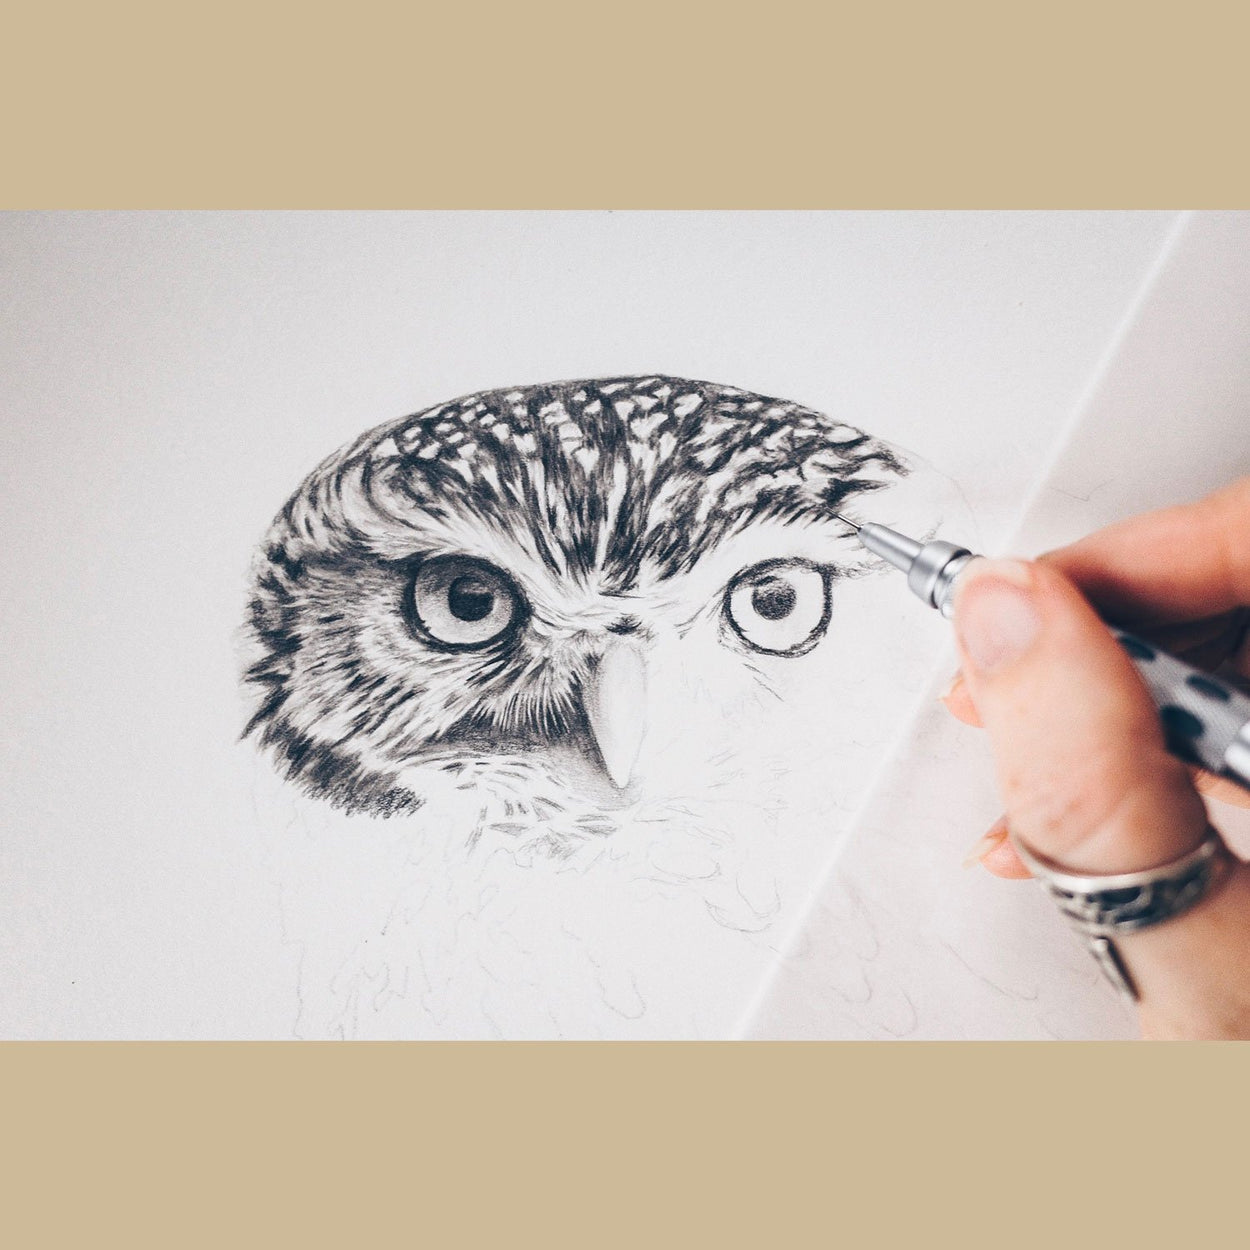 Little Owl Face Drawing Pencil - The Thriving Wild Jill Dimond